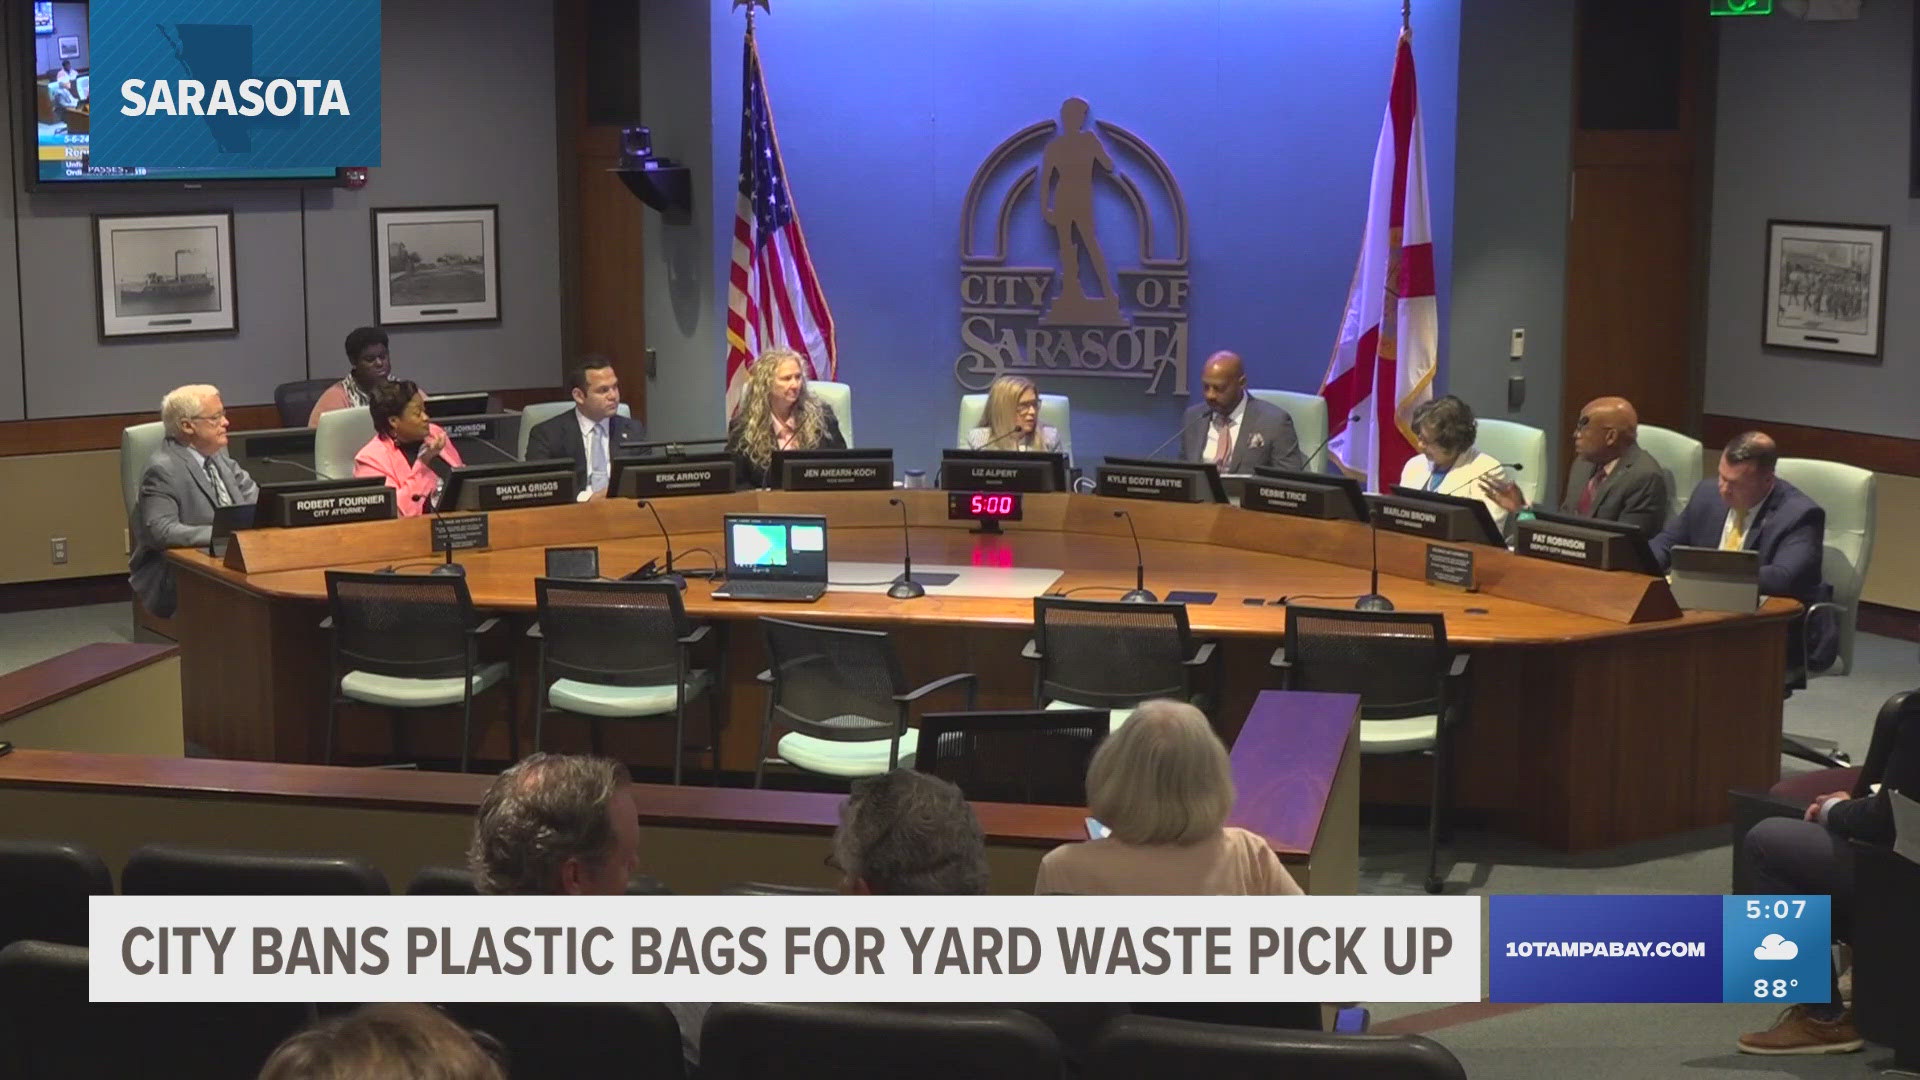 In a 4-1 vote, Sarasota city commissioners moved forward with the plan to ban the use of plastic bags for yard waste collection.